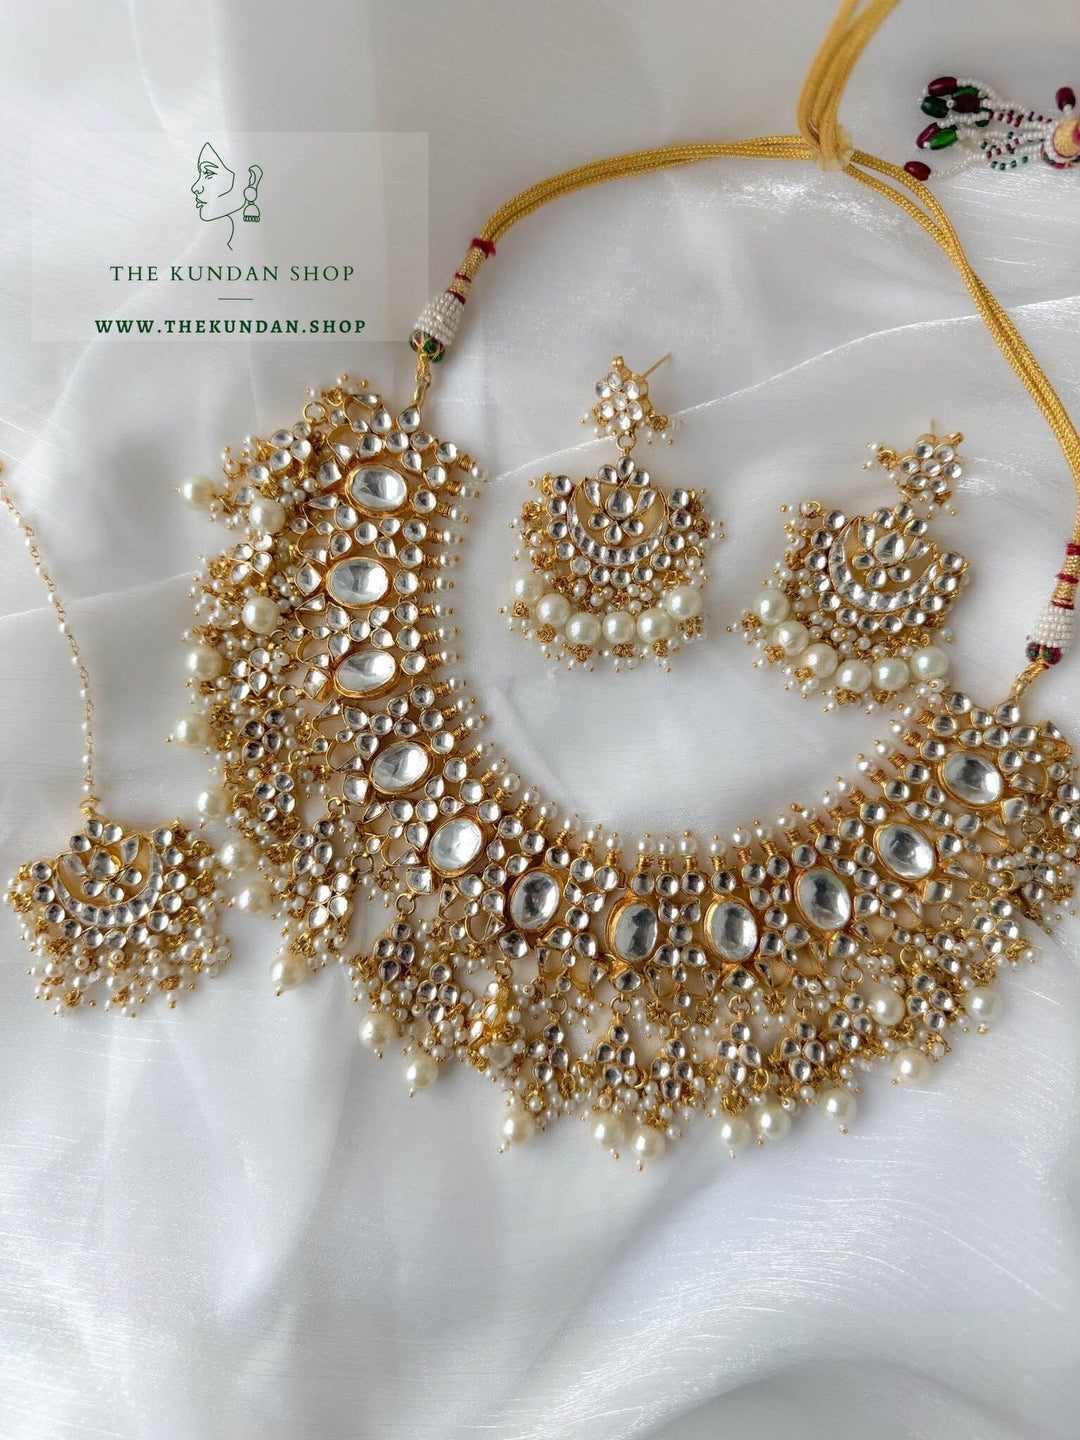 Lost in Thought in Pearls Necklace Sets THE KUNDAN SHOP 